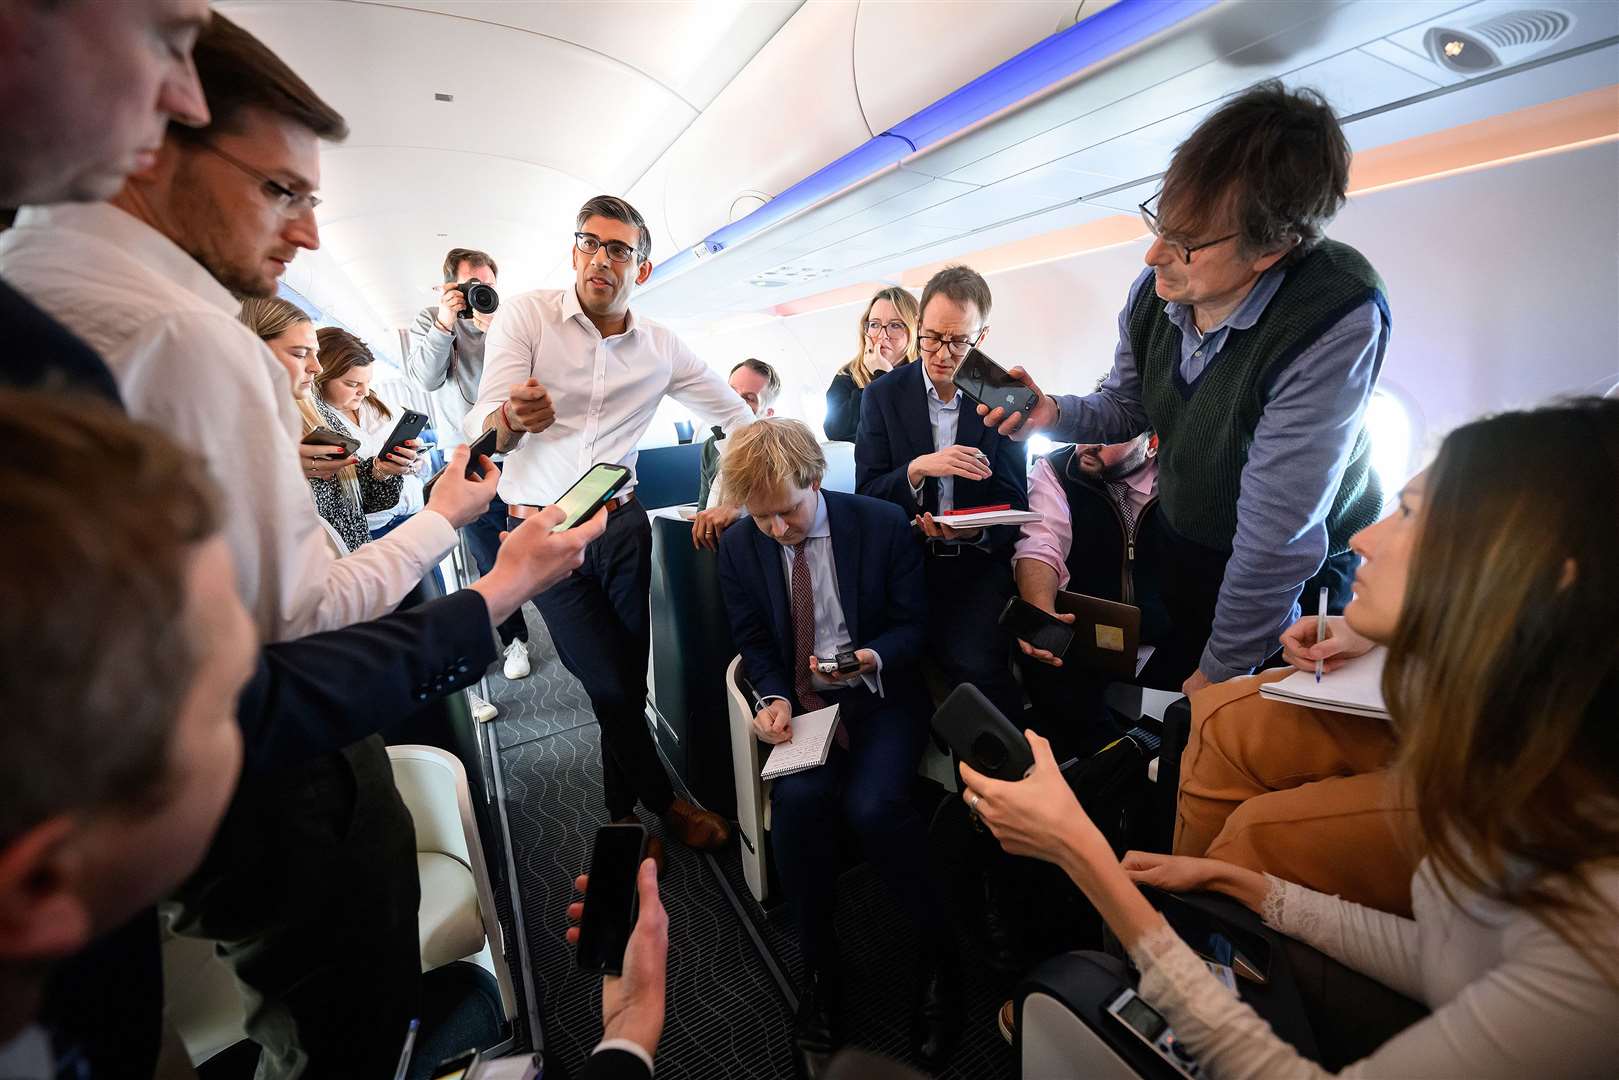 Prime Minister Rishi Sunak speaks to members of the travelling media during his flight to San Diego in the US (Leon Neal/PA)